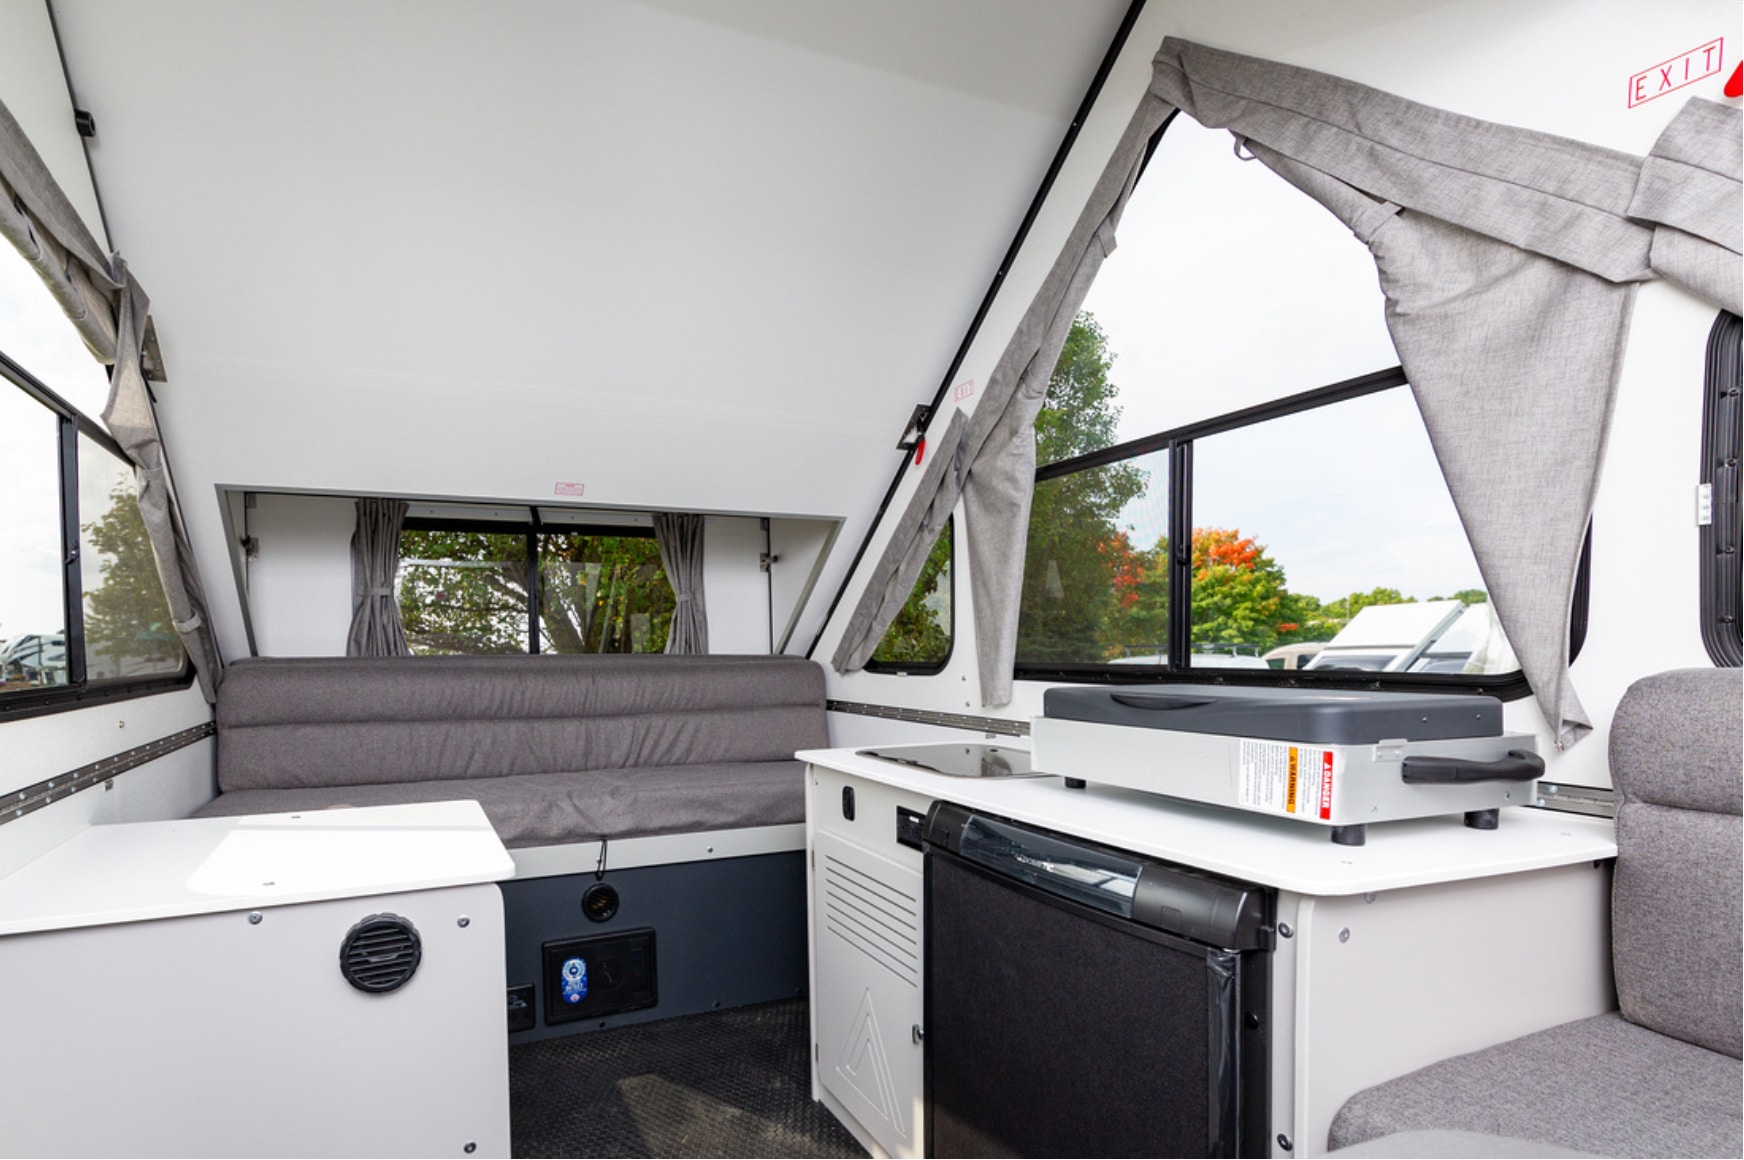 The interior of an rv with a sink and a refrigerator.